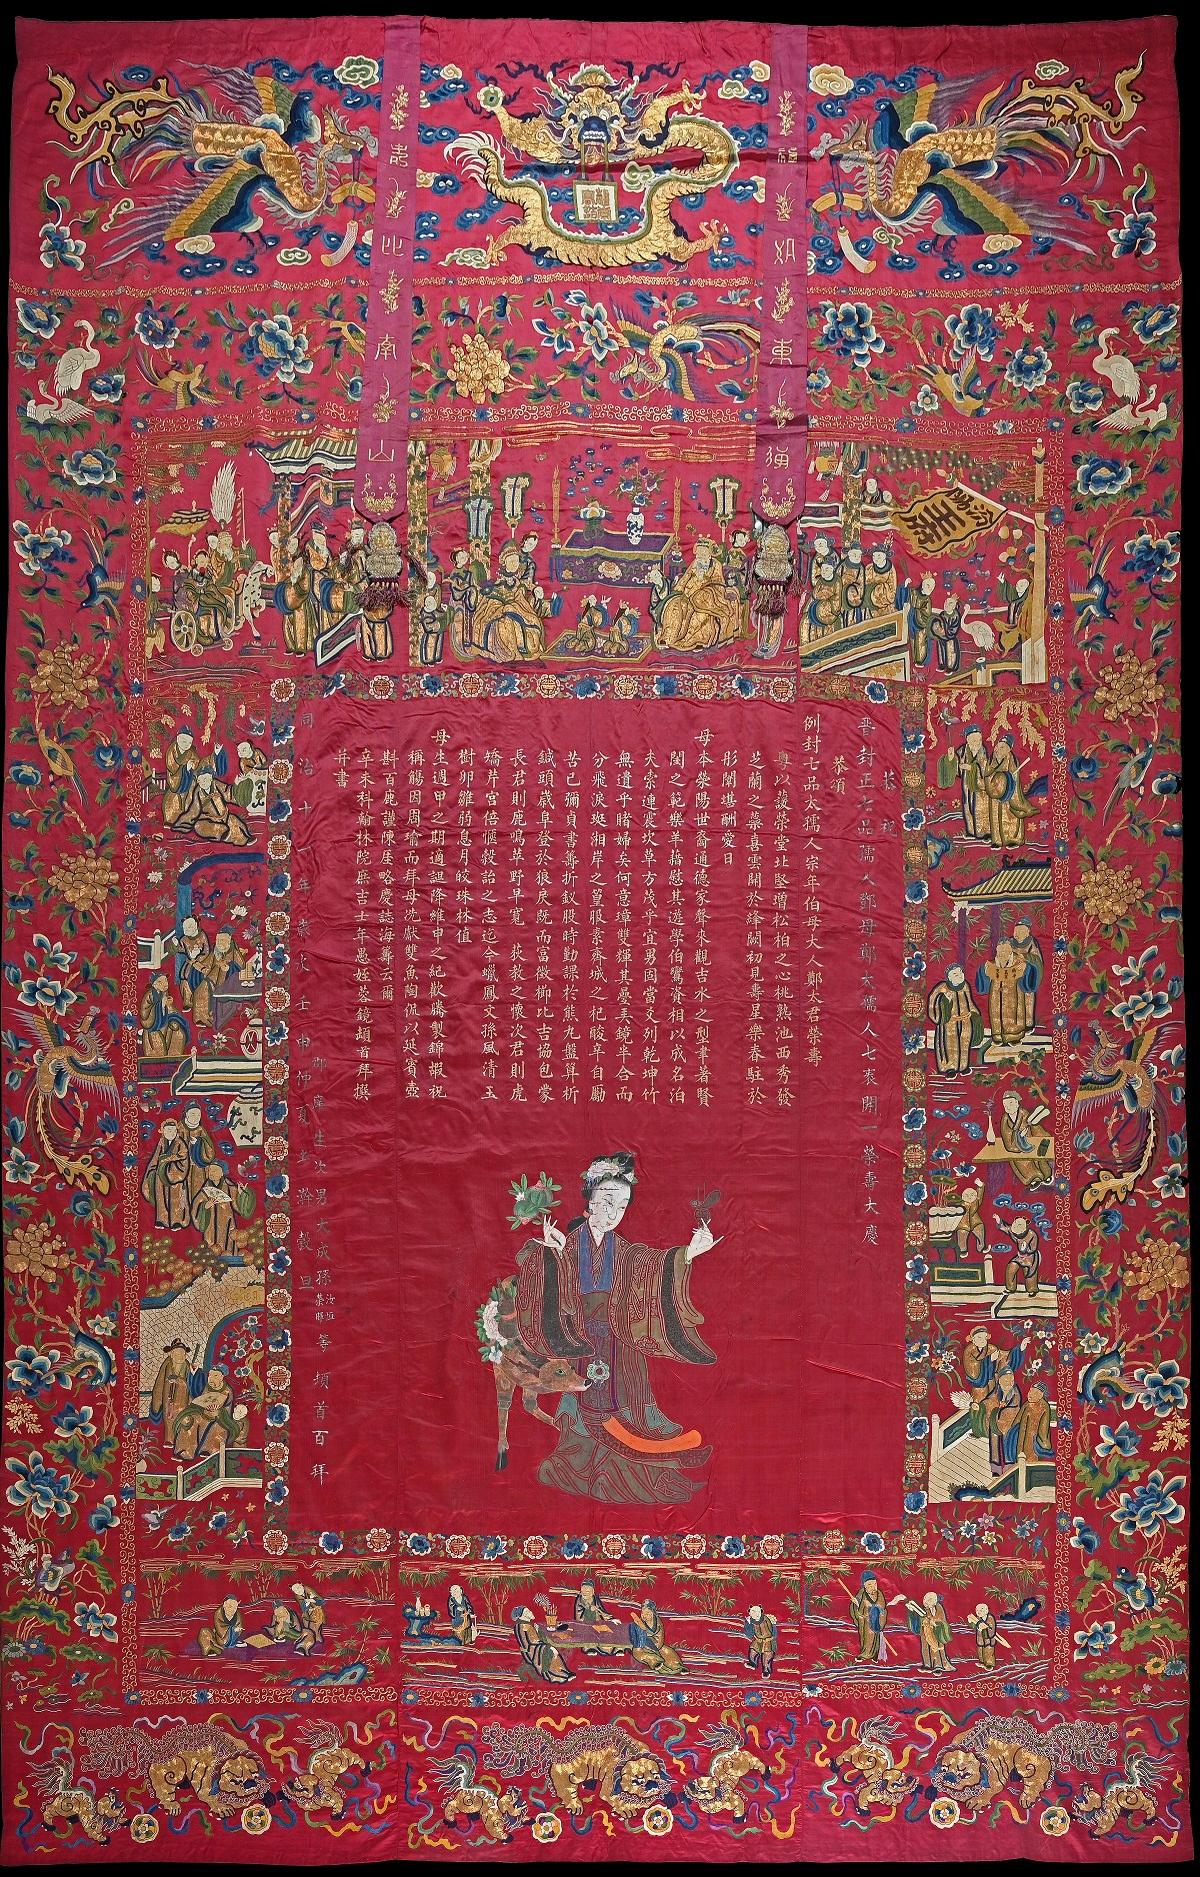 The embroidered silk birthday hanging of the Tang Clan in Ping Shan, form the collection of the Hong Kong Museum of History, is about four metres high. It is decorated with auspicious patterns such as "Guo Ziyi's birthday celebration" and "Magu presenting birthday gifts" which symoblise the blessing of longevity.